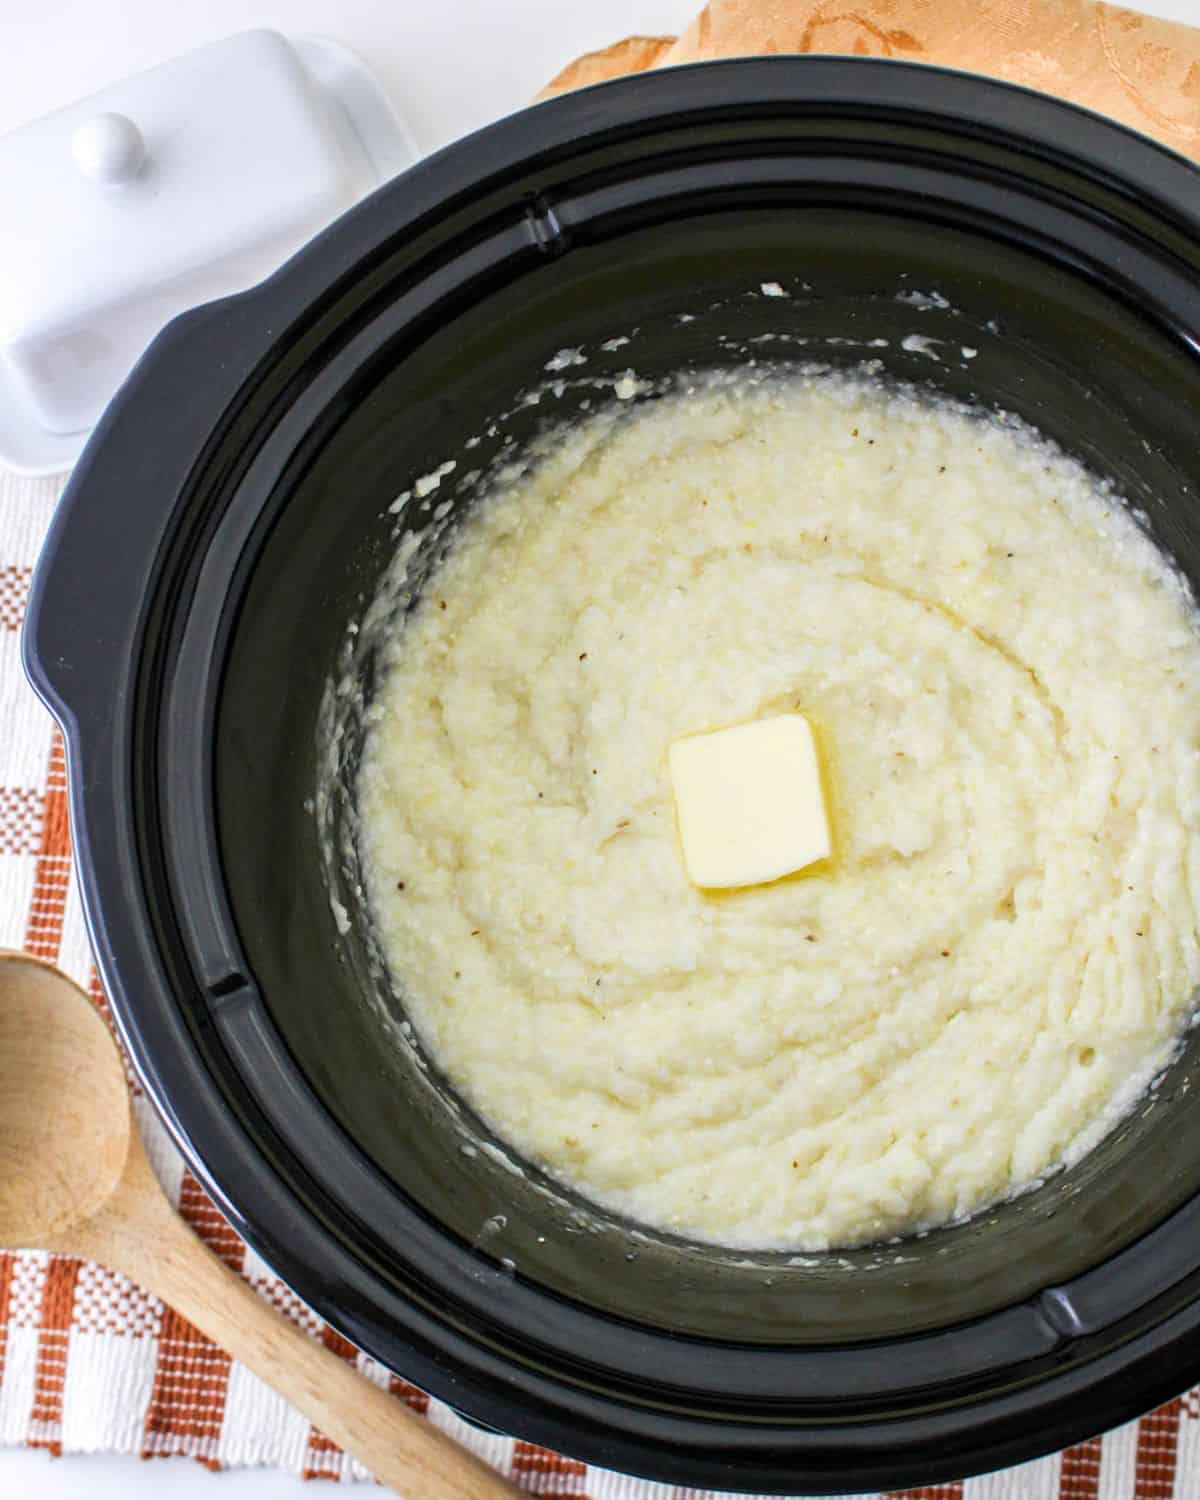 A slow cooker vessel with cooked grits topped with butter.